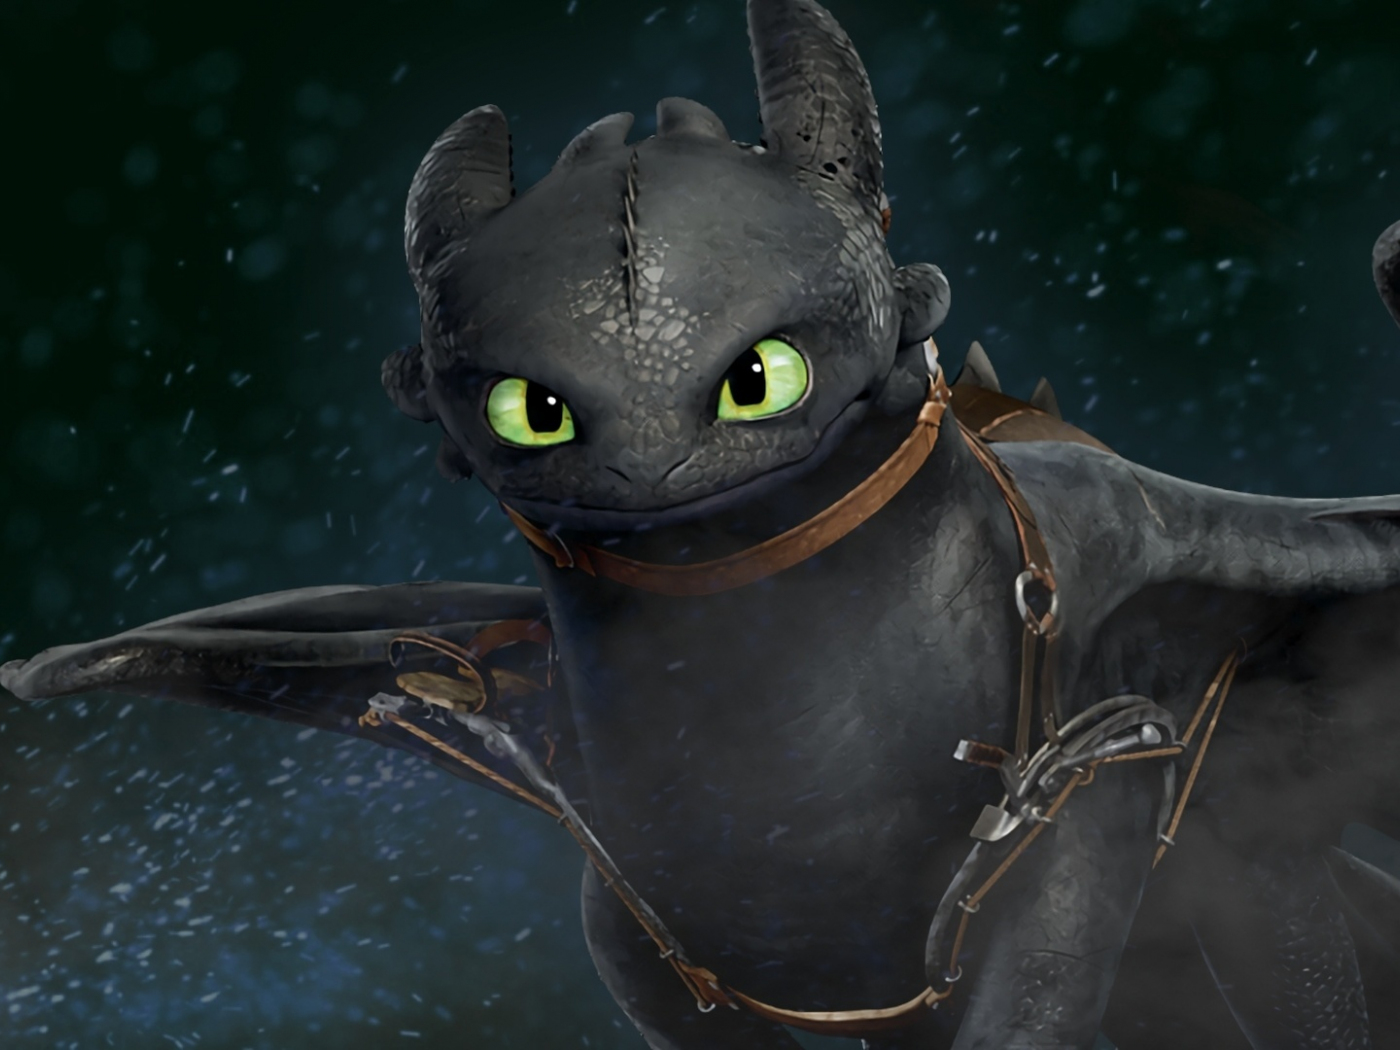 Download 1400x1050 wallpaper dragon, toothless, how to